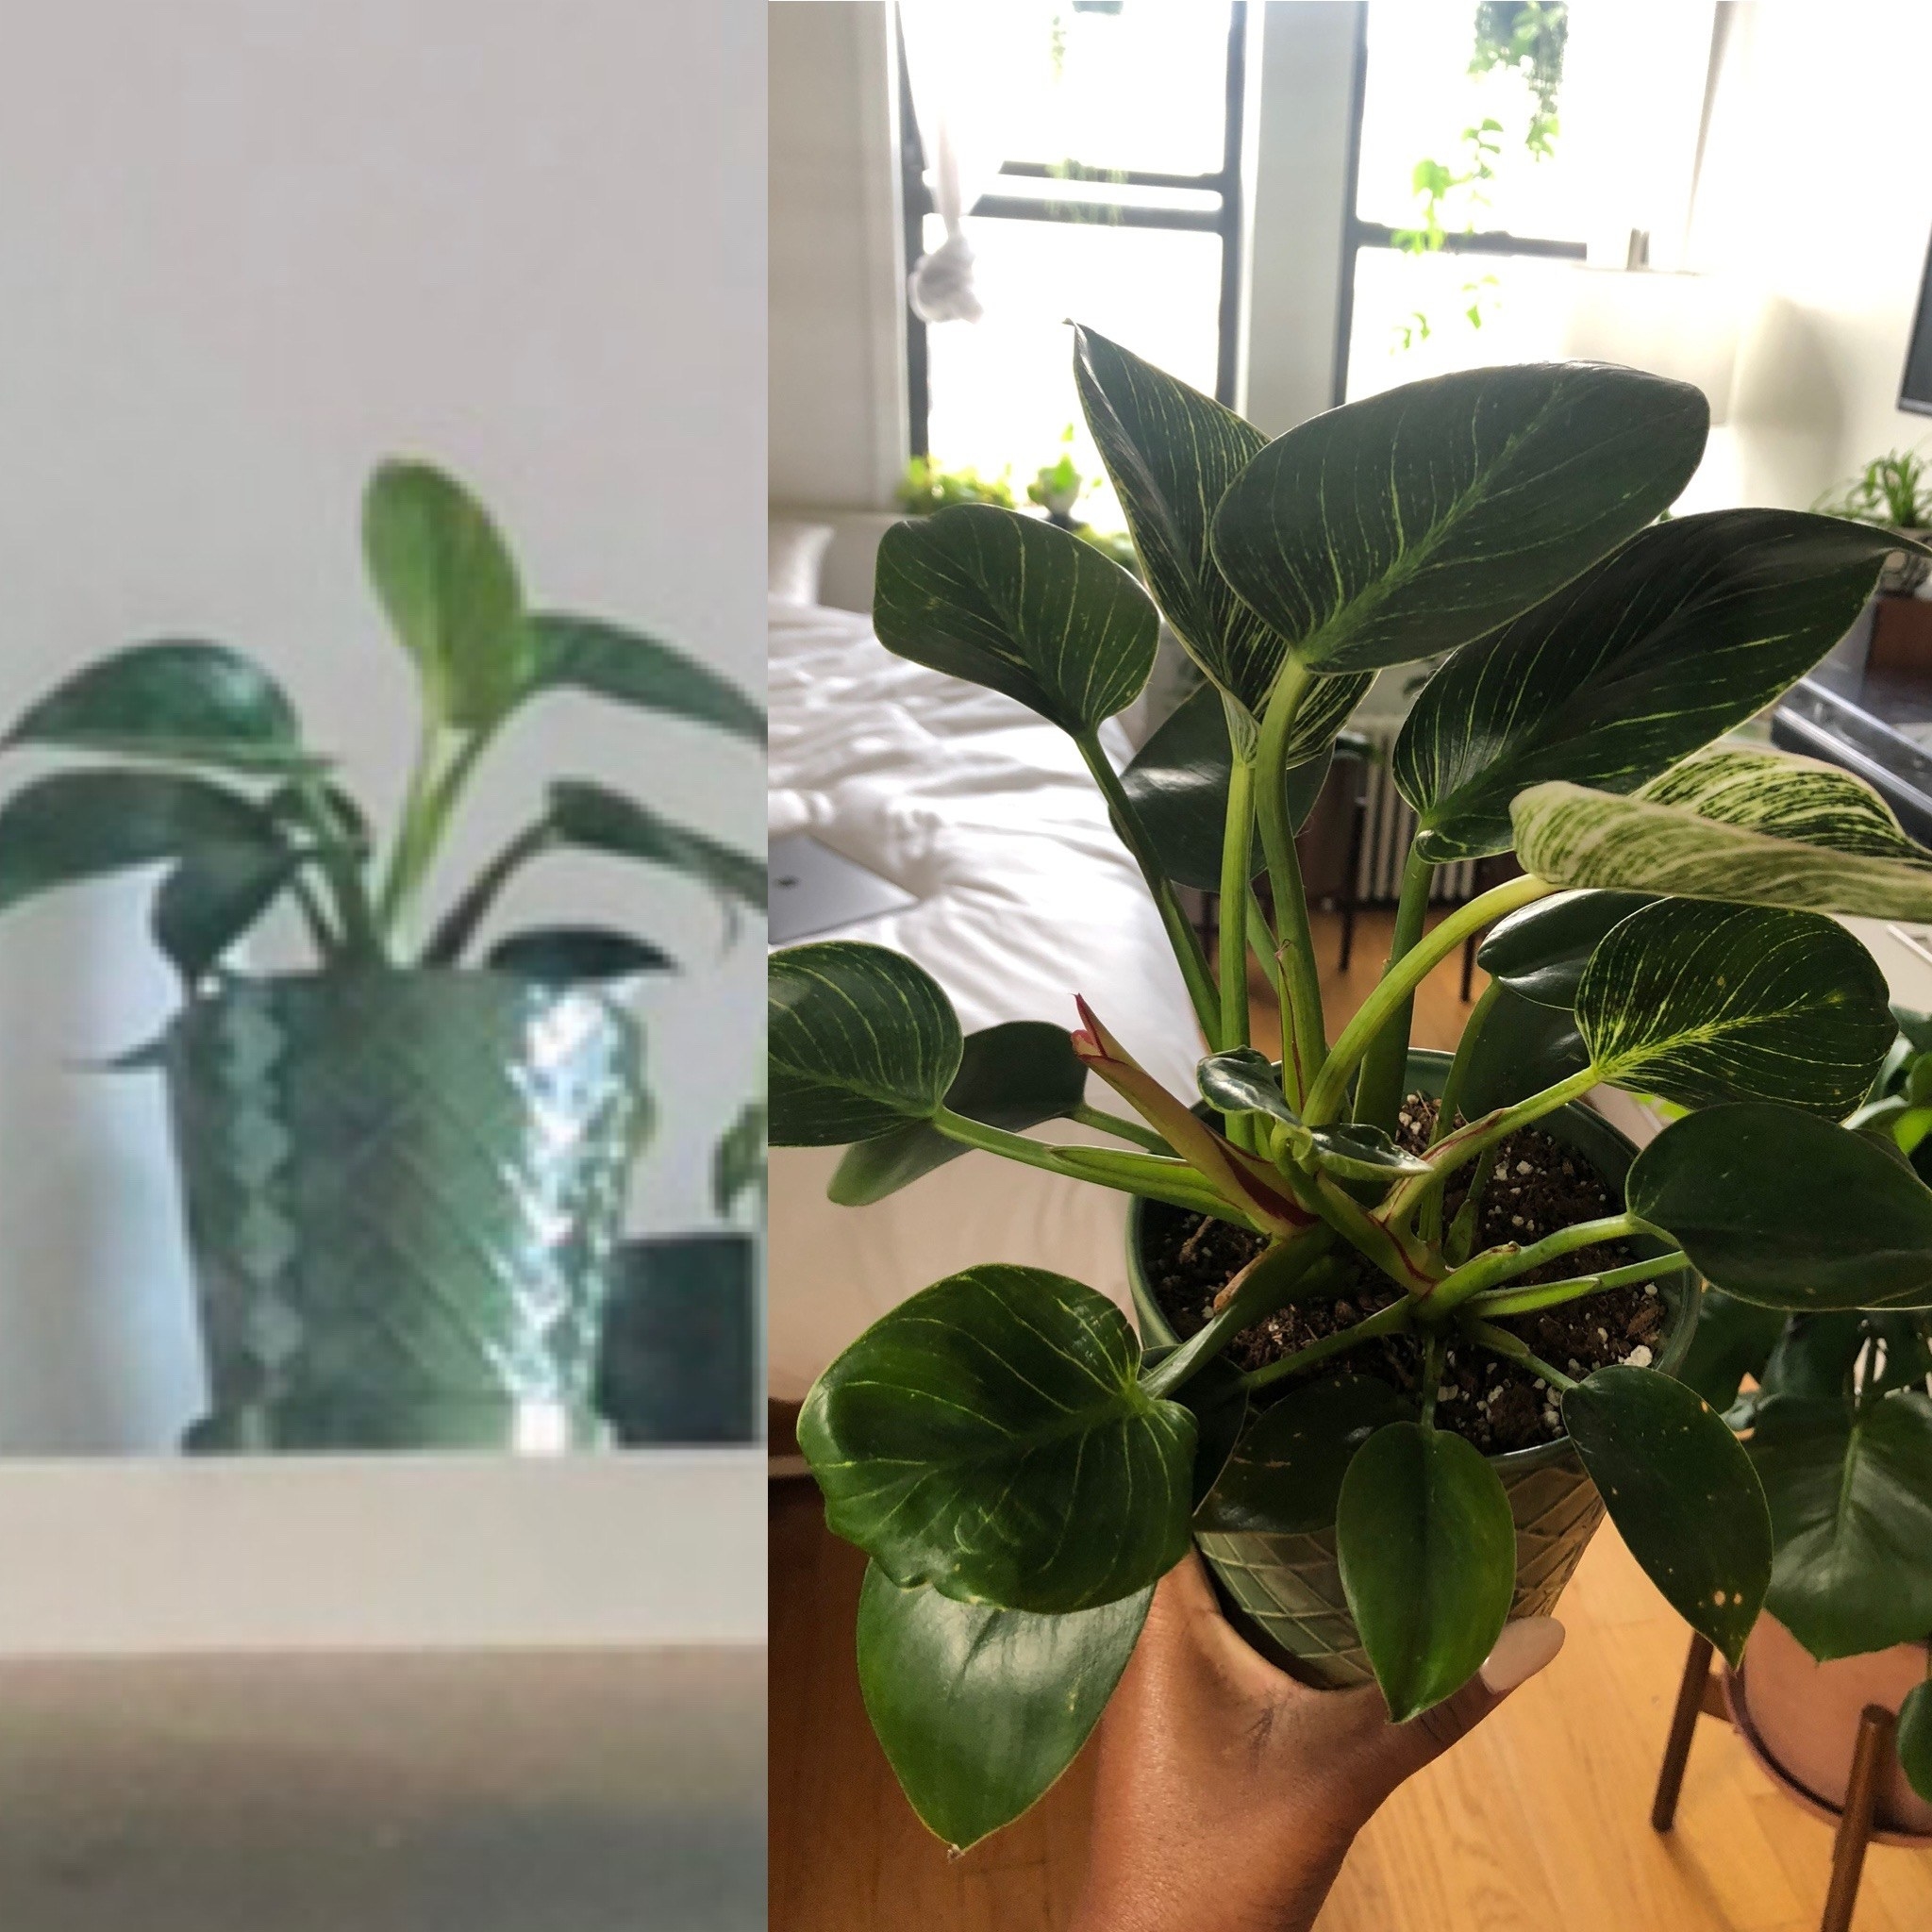 A reviewer's plant / A reviewer's larger plant after 4 months of growth